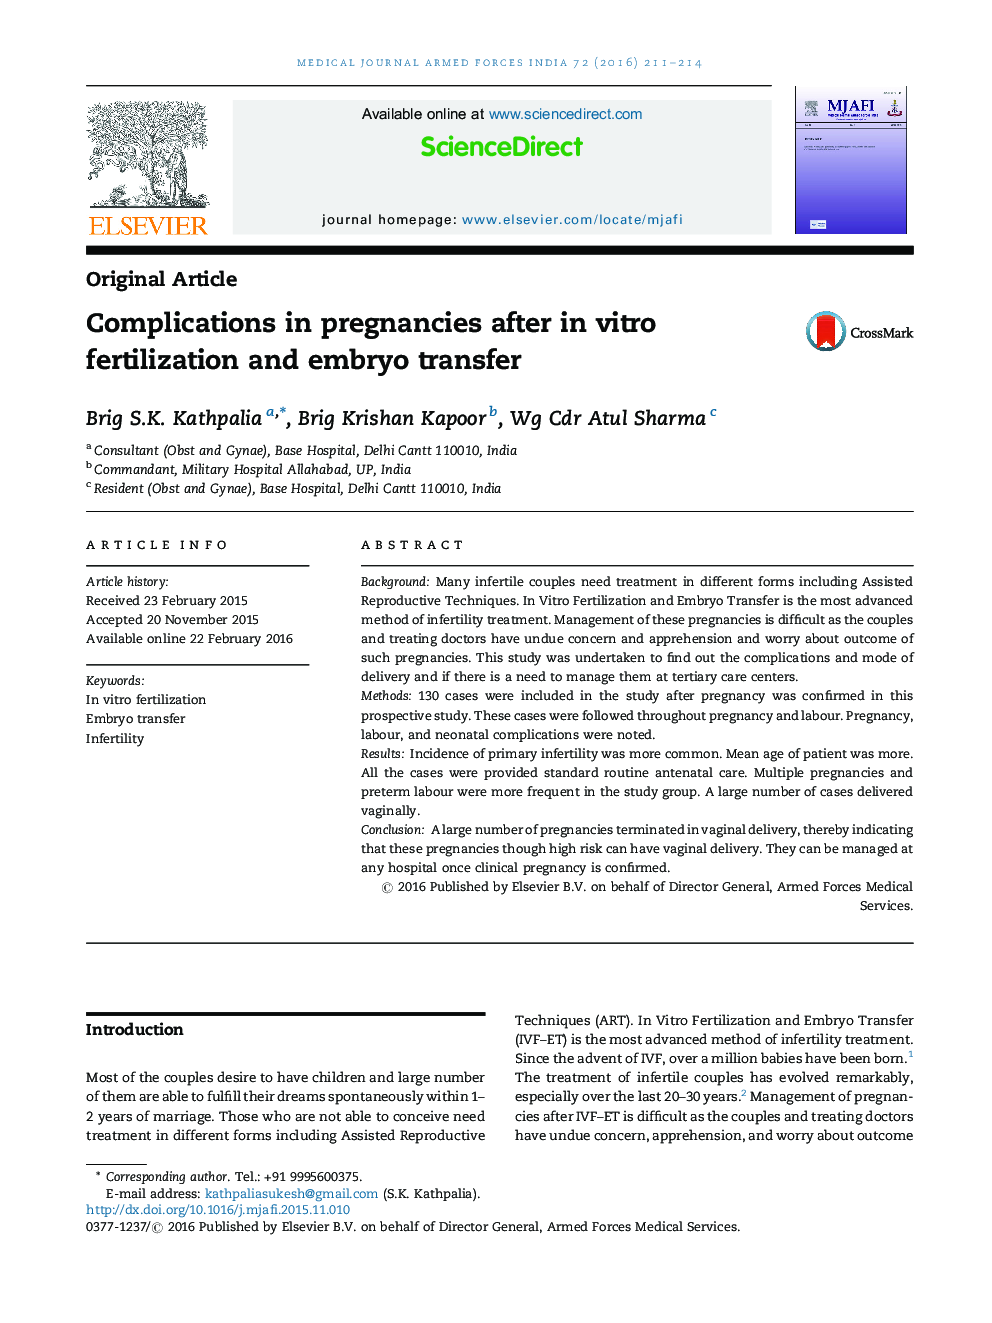 Complications in pregnancies after in vitro fertilization and embryo transfer